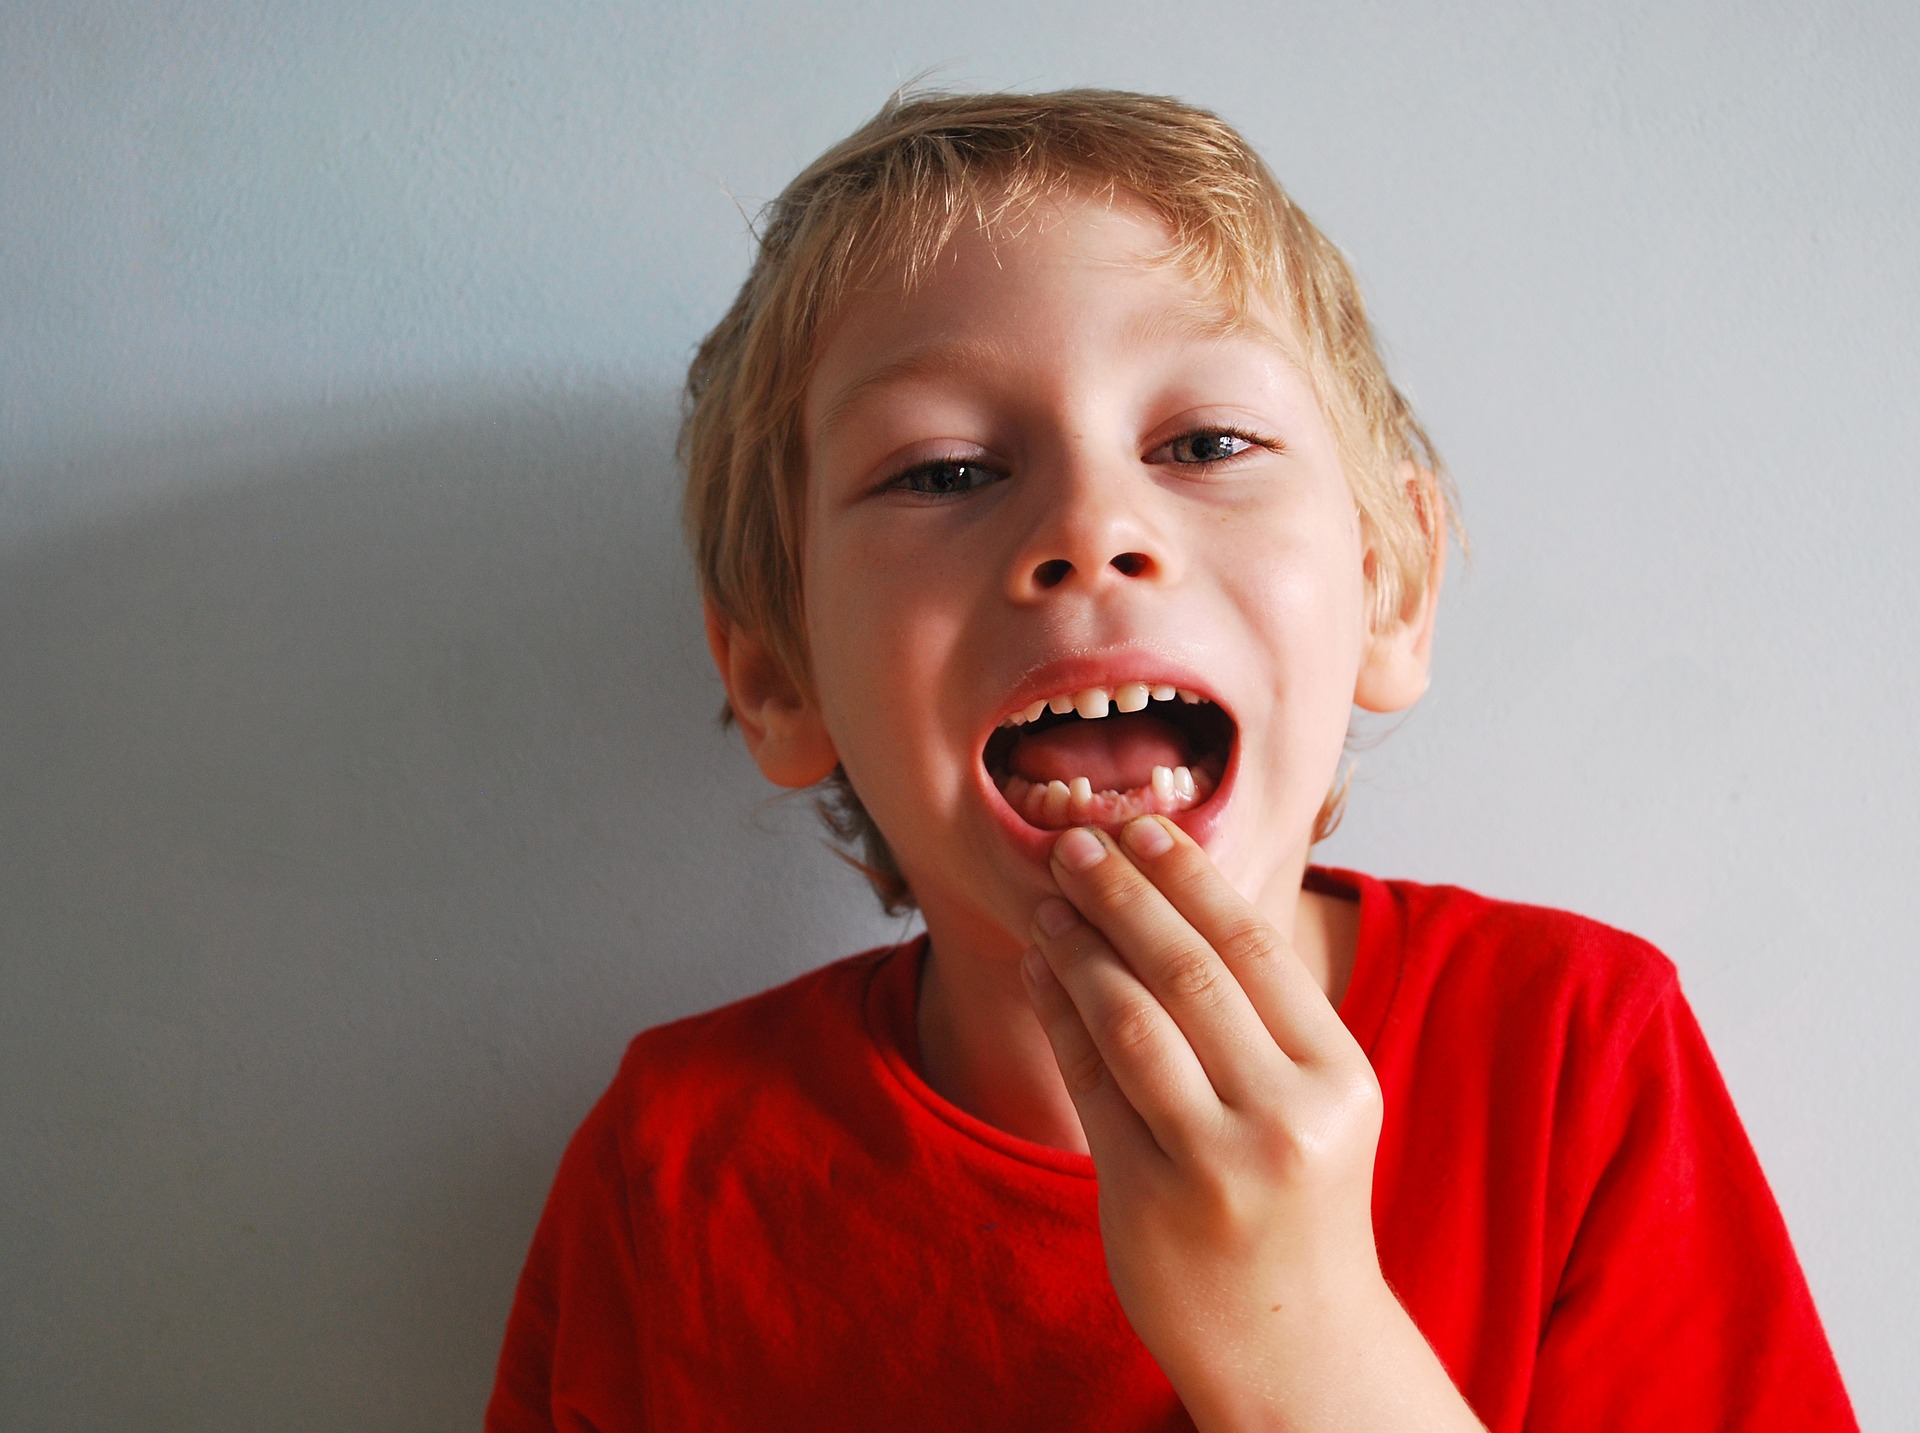 Should You Worry About a Possible Cavity on a Kid’s Baby Teeth?